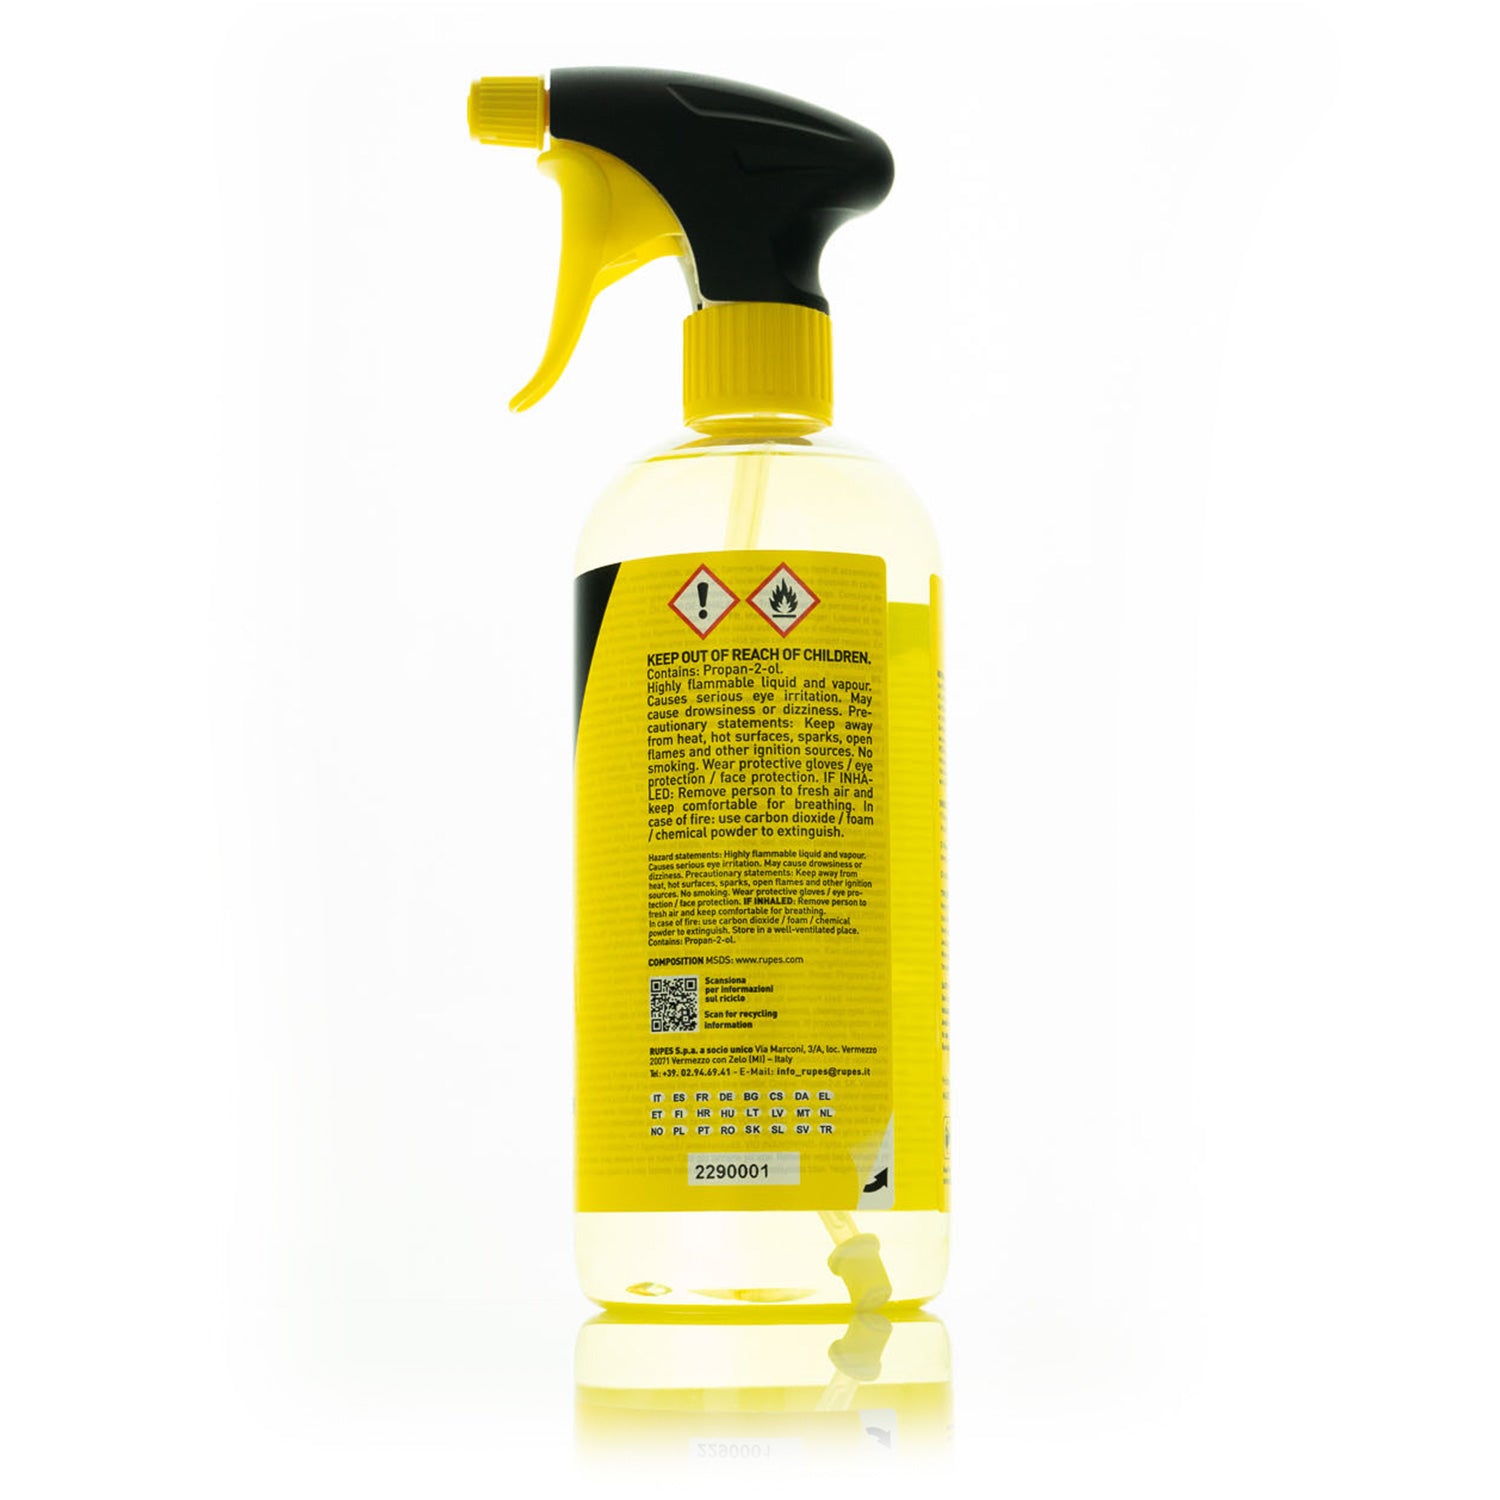 reveal-lite-residue-remover-750-side